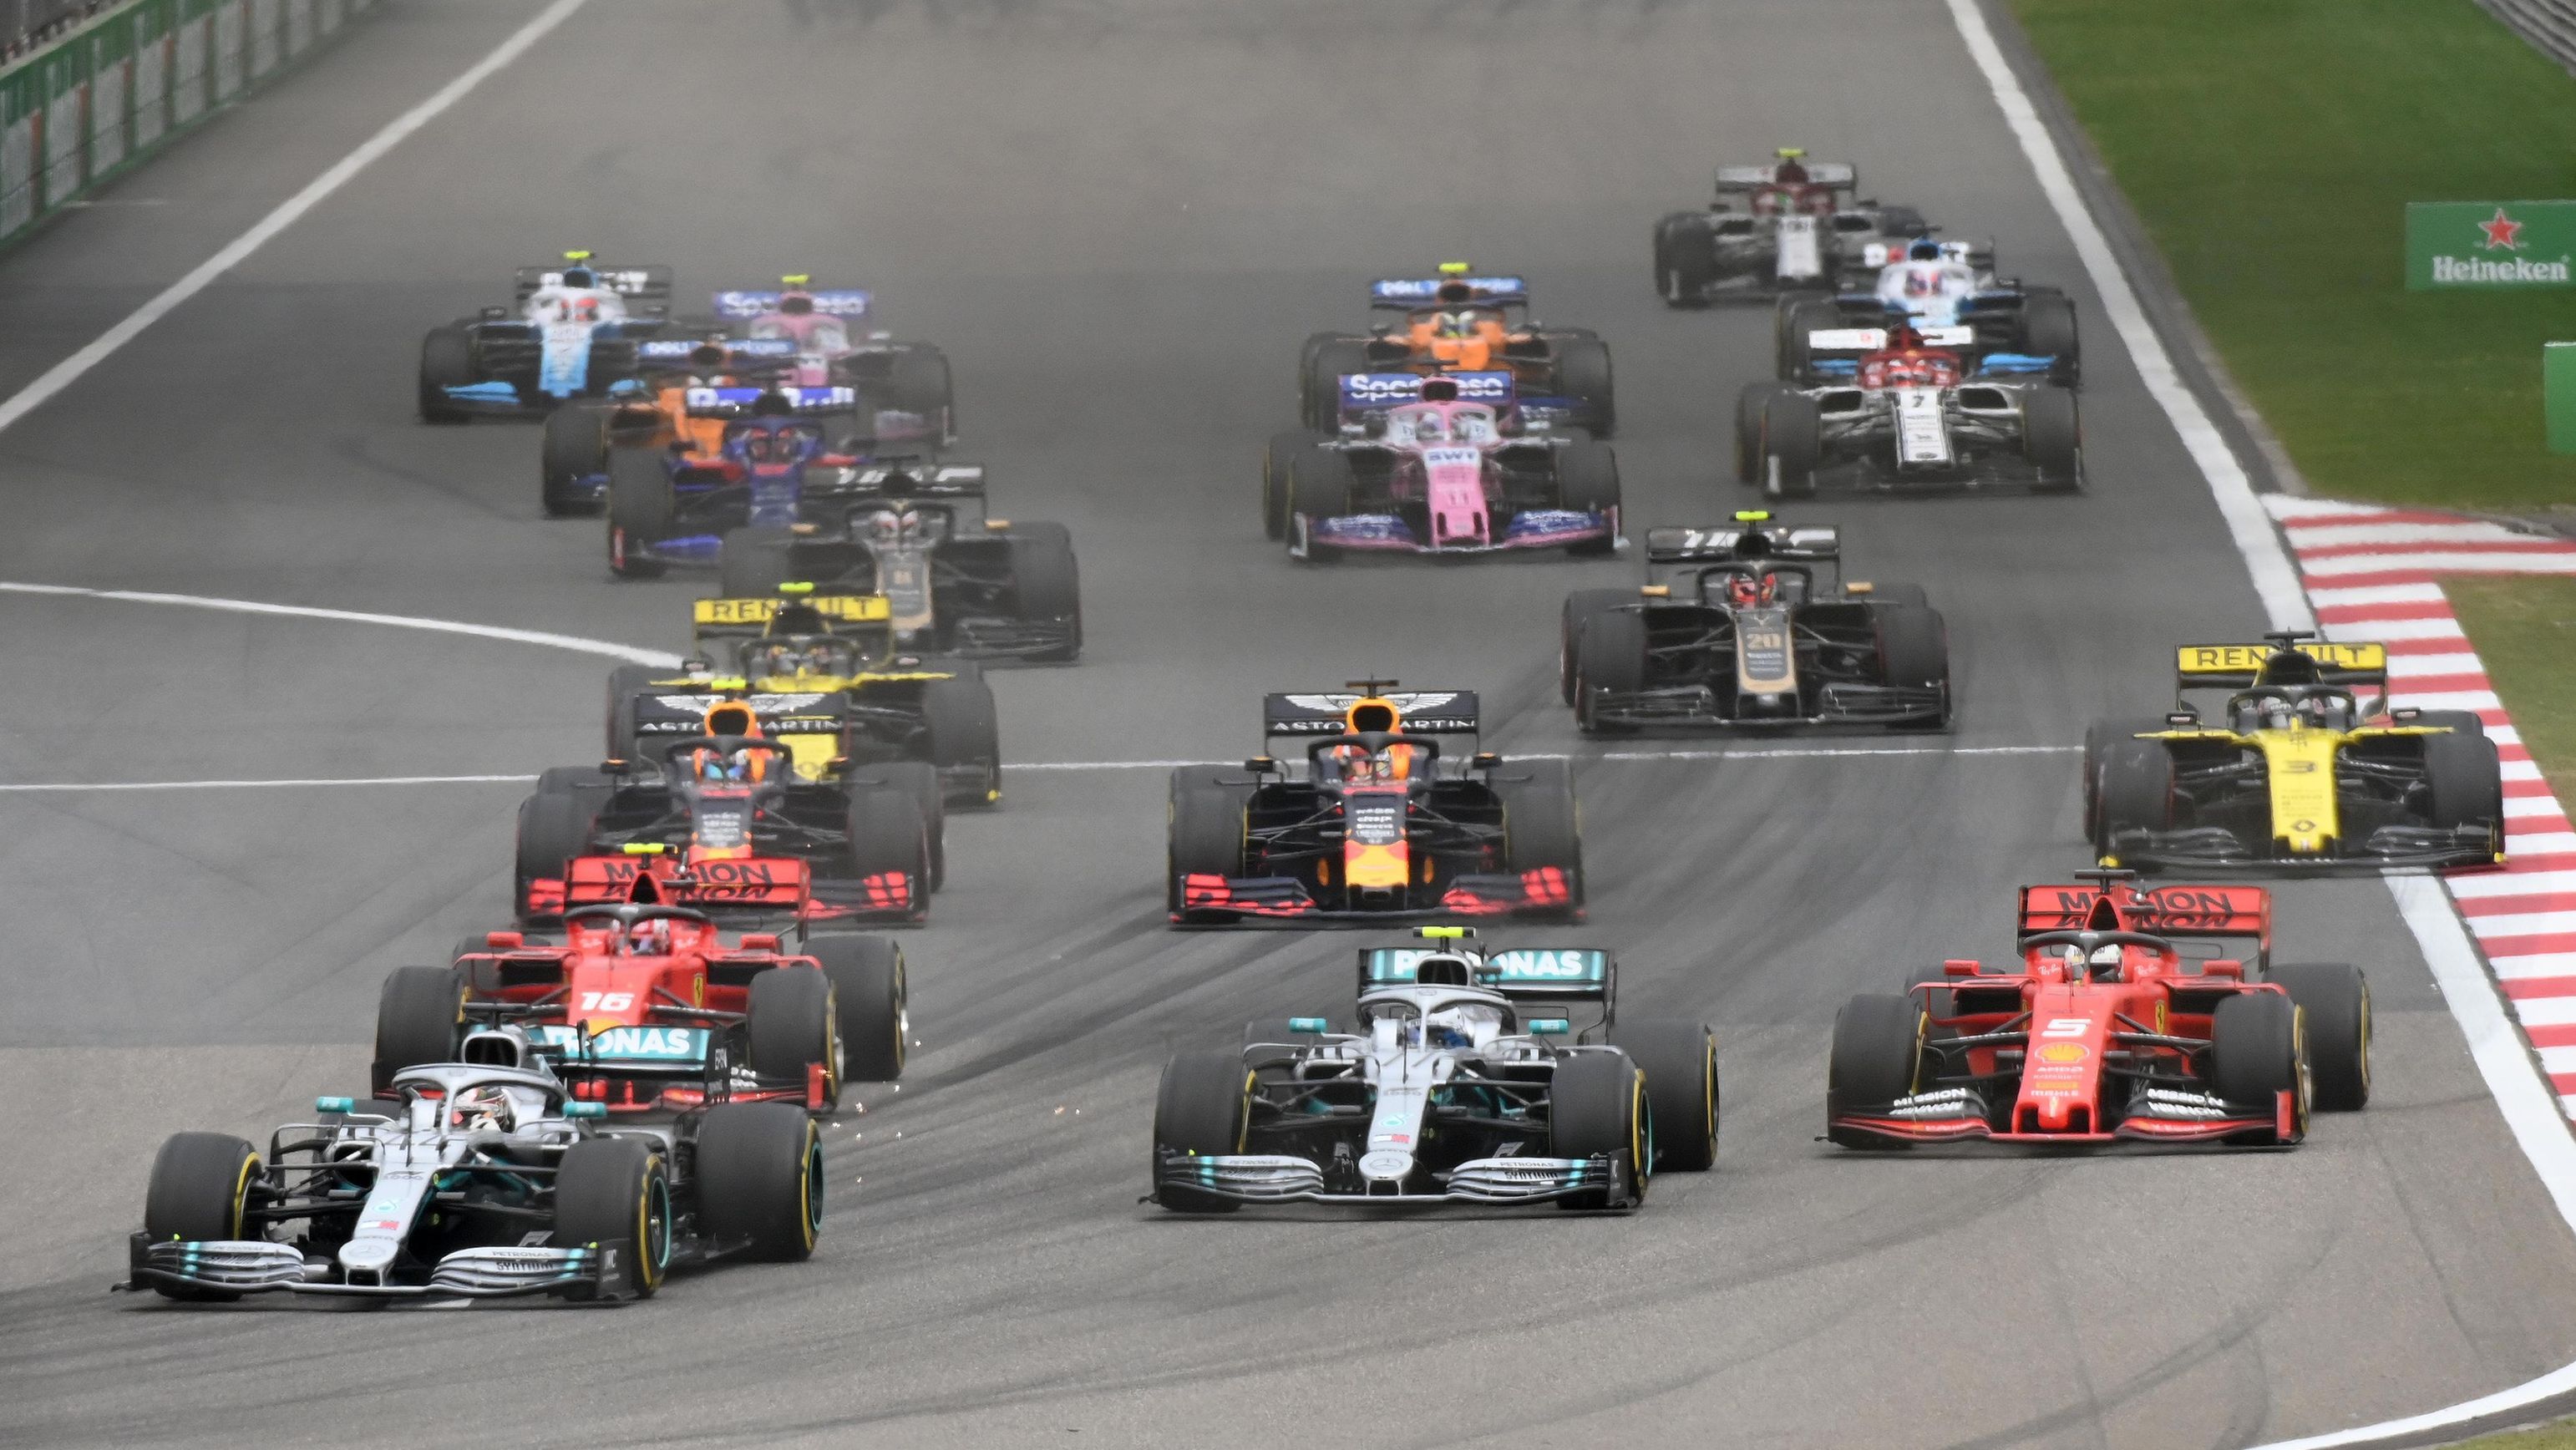 Racers compete in the 2019 Chinese Grand Prix at the Shanghai International Circuit.